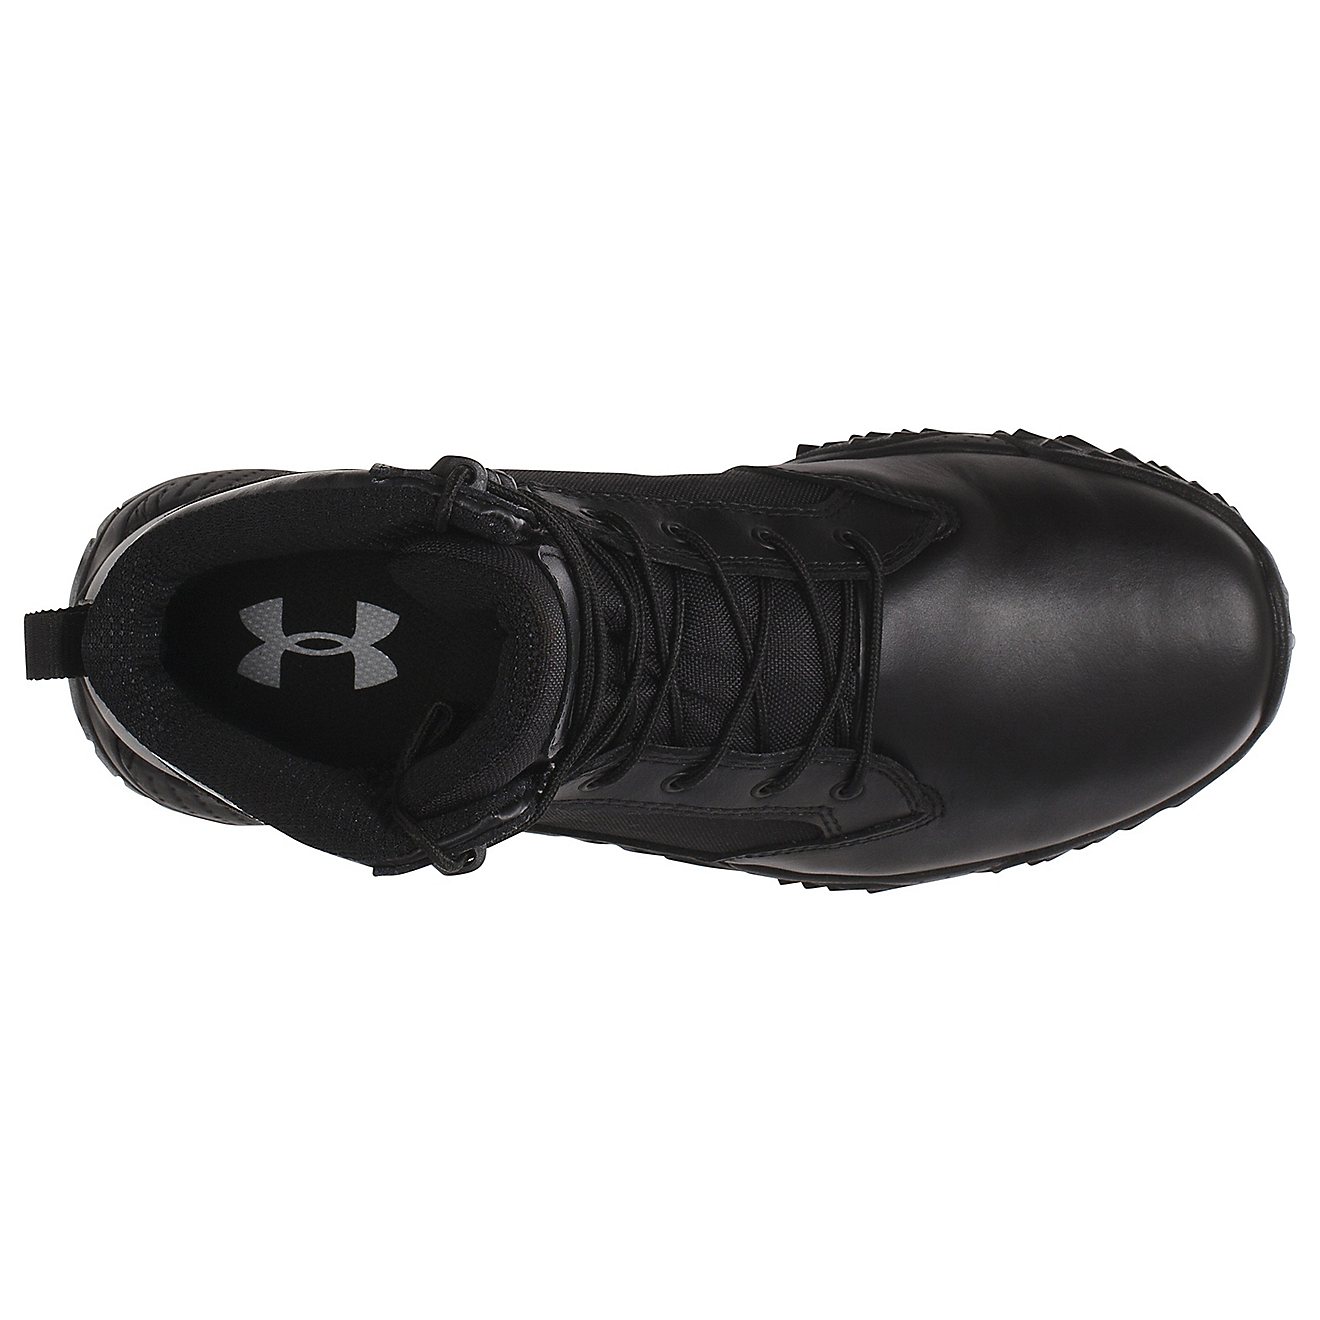 Under Armour Men's Stellar Tactical Boots                                                                                        - view number 3